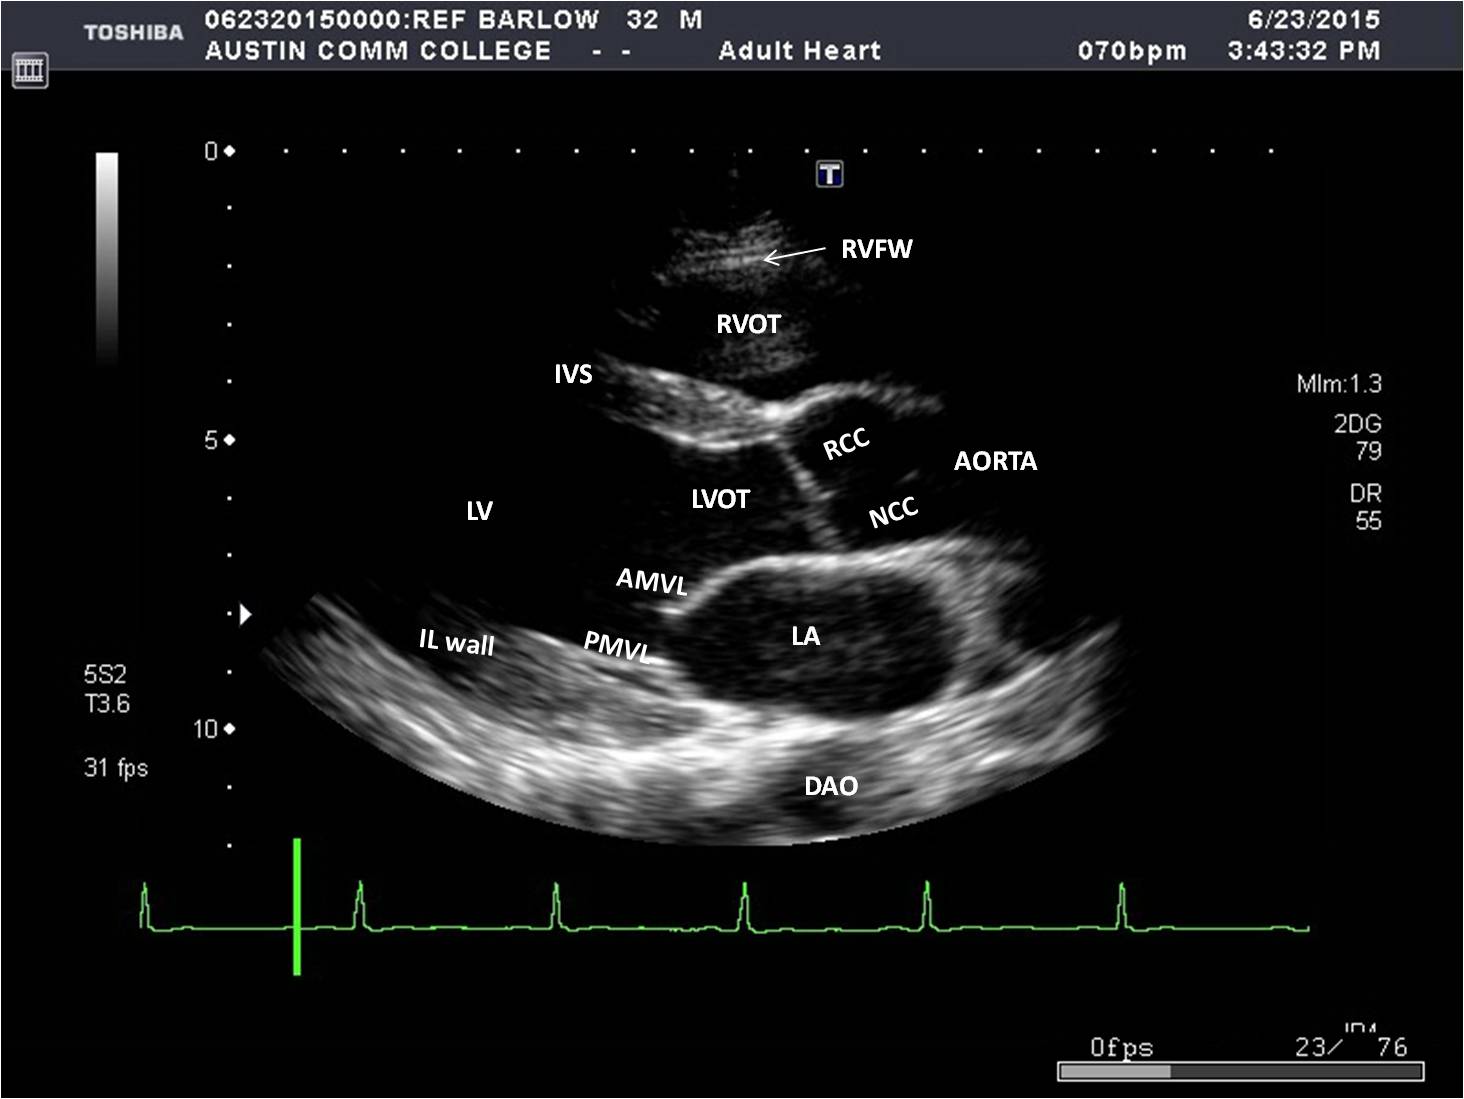 Parasternal Window Sonography Resources